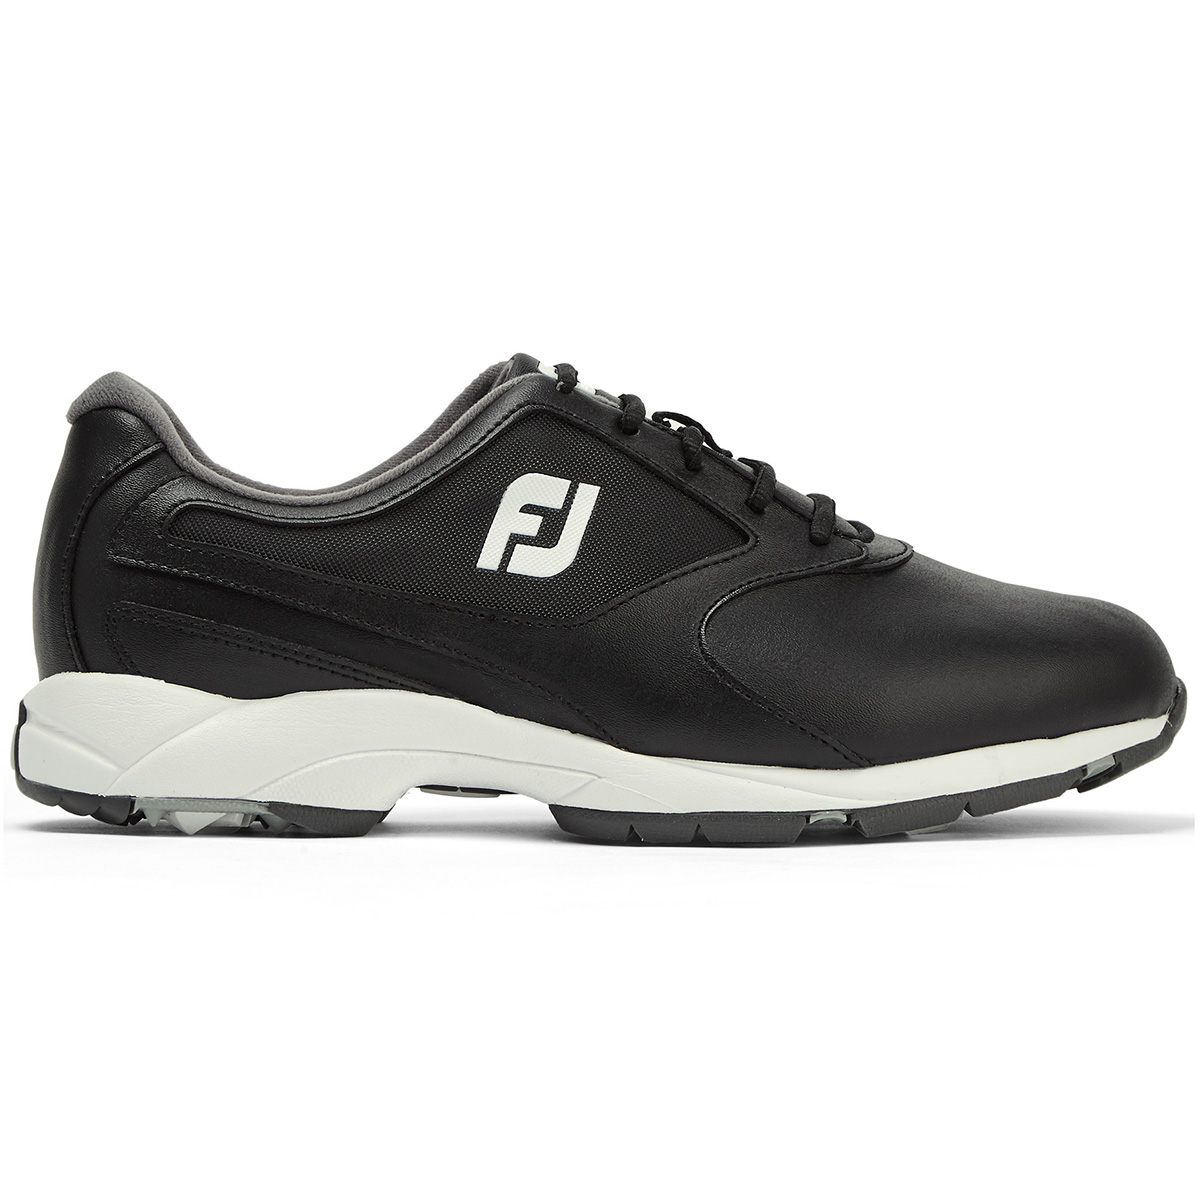 FootJoy Athletics Shoes from american golf